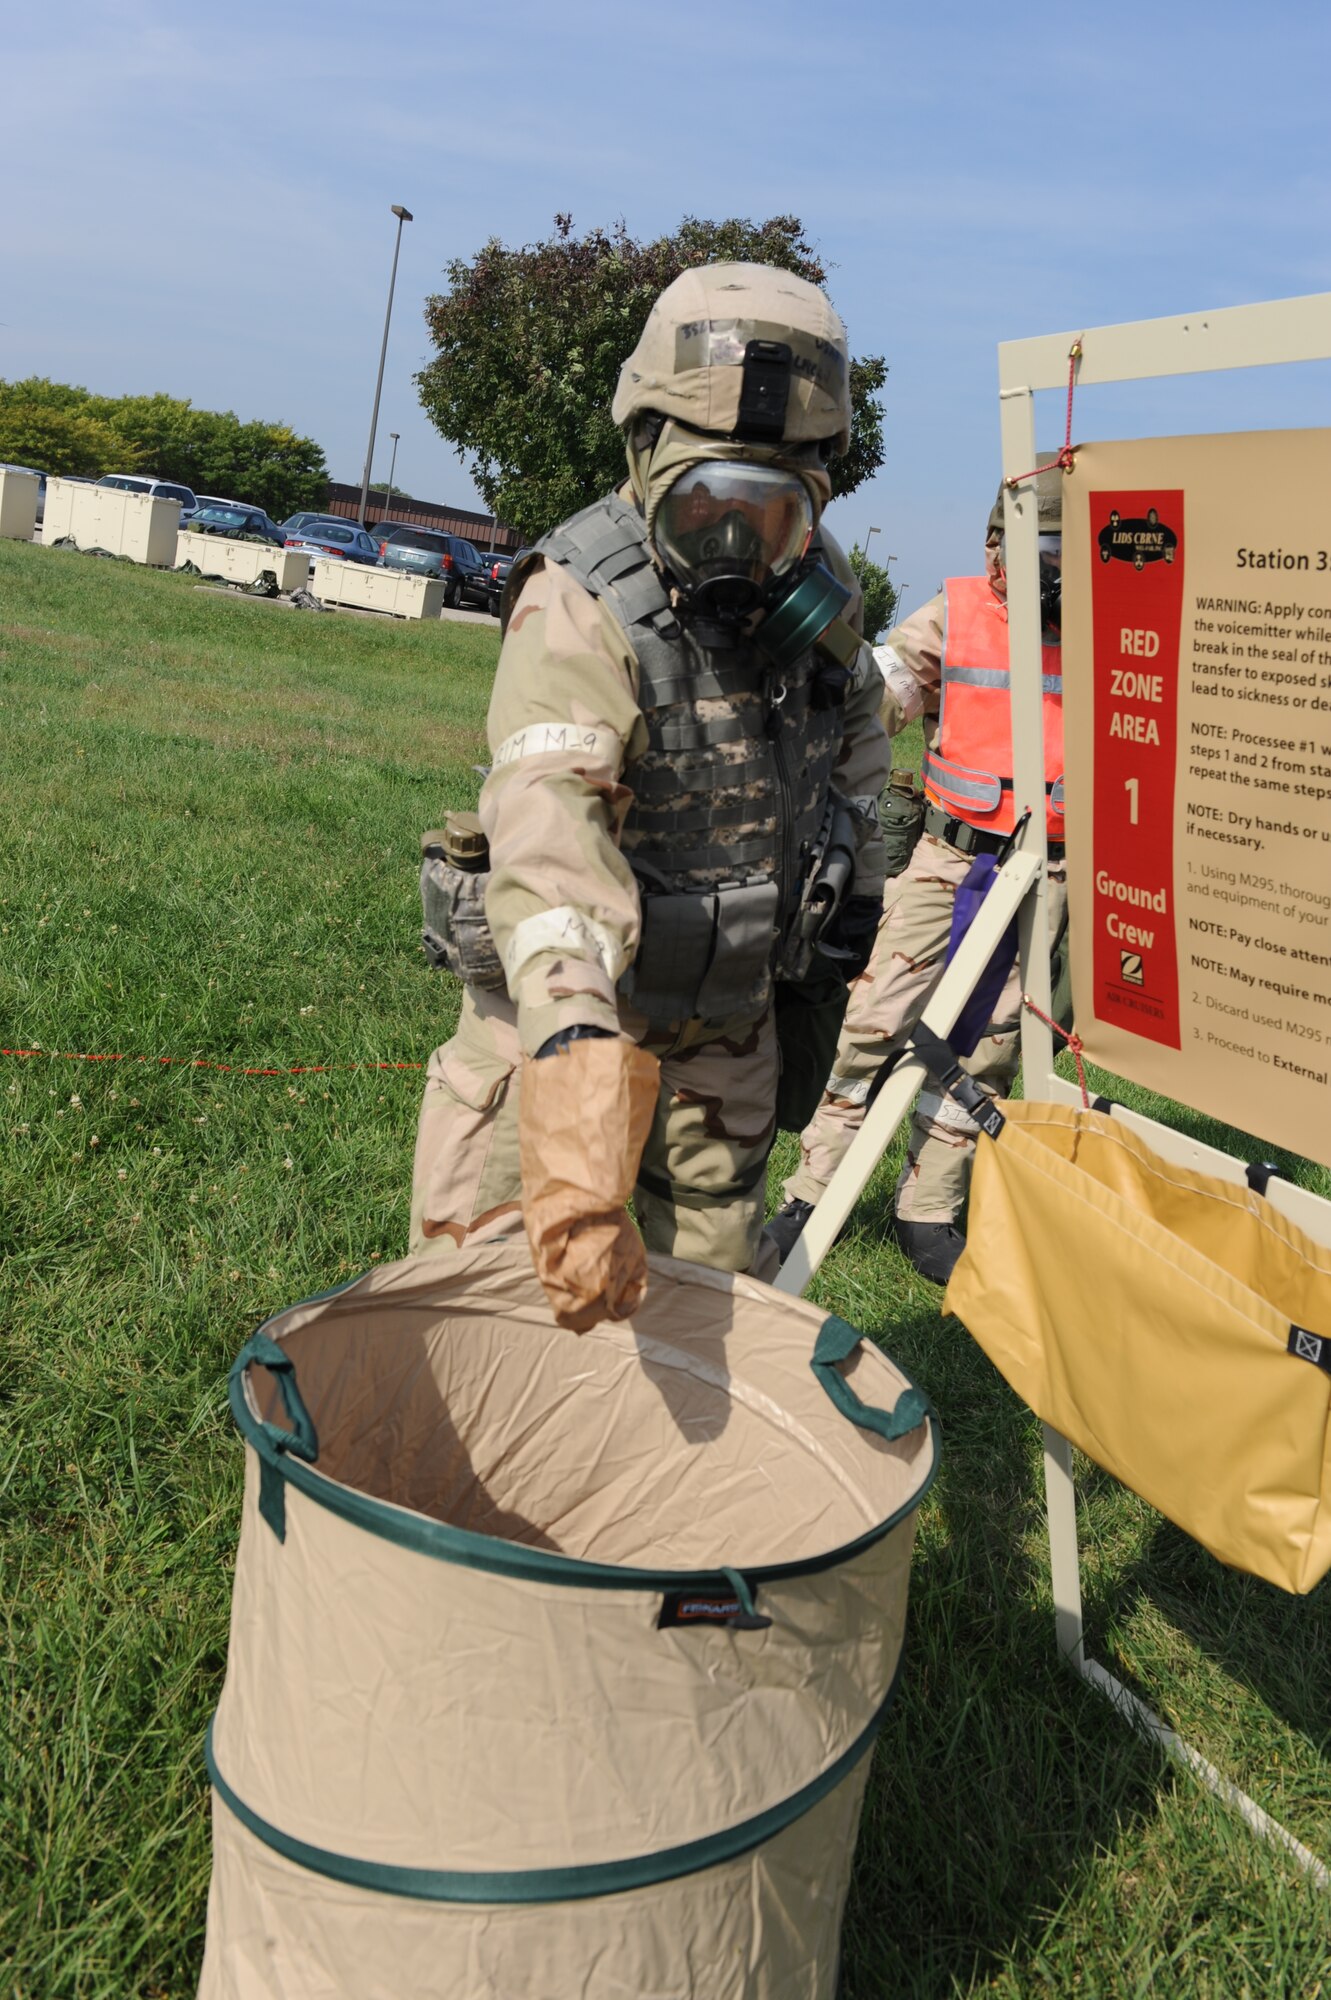 WHITEMAN AIR FORCE BASE, Mo. – a member of the 442nd Fighter Wing throws away a contaminated paper bag while possessing through a chemical line during an exercise, Sept. 16. The 442nd Fighter Wing has exercise to ensure their members remain current on their readiness training. (U.S. Air Force Photo/ SrA Cory Todd)